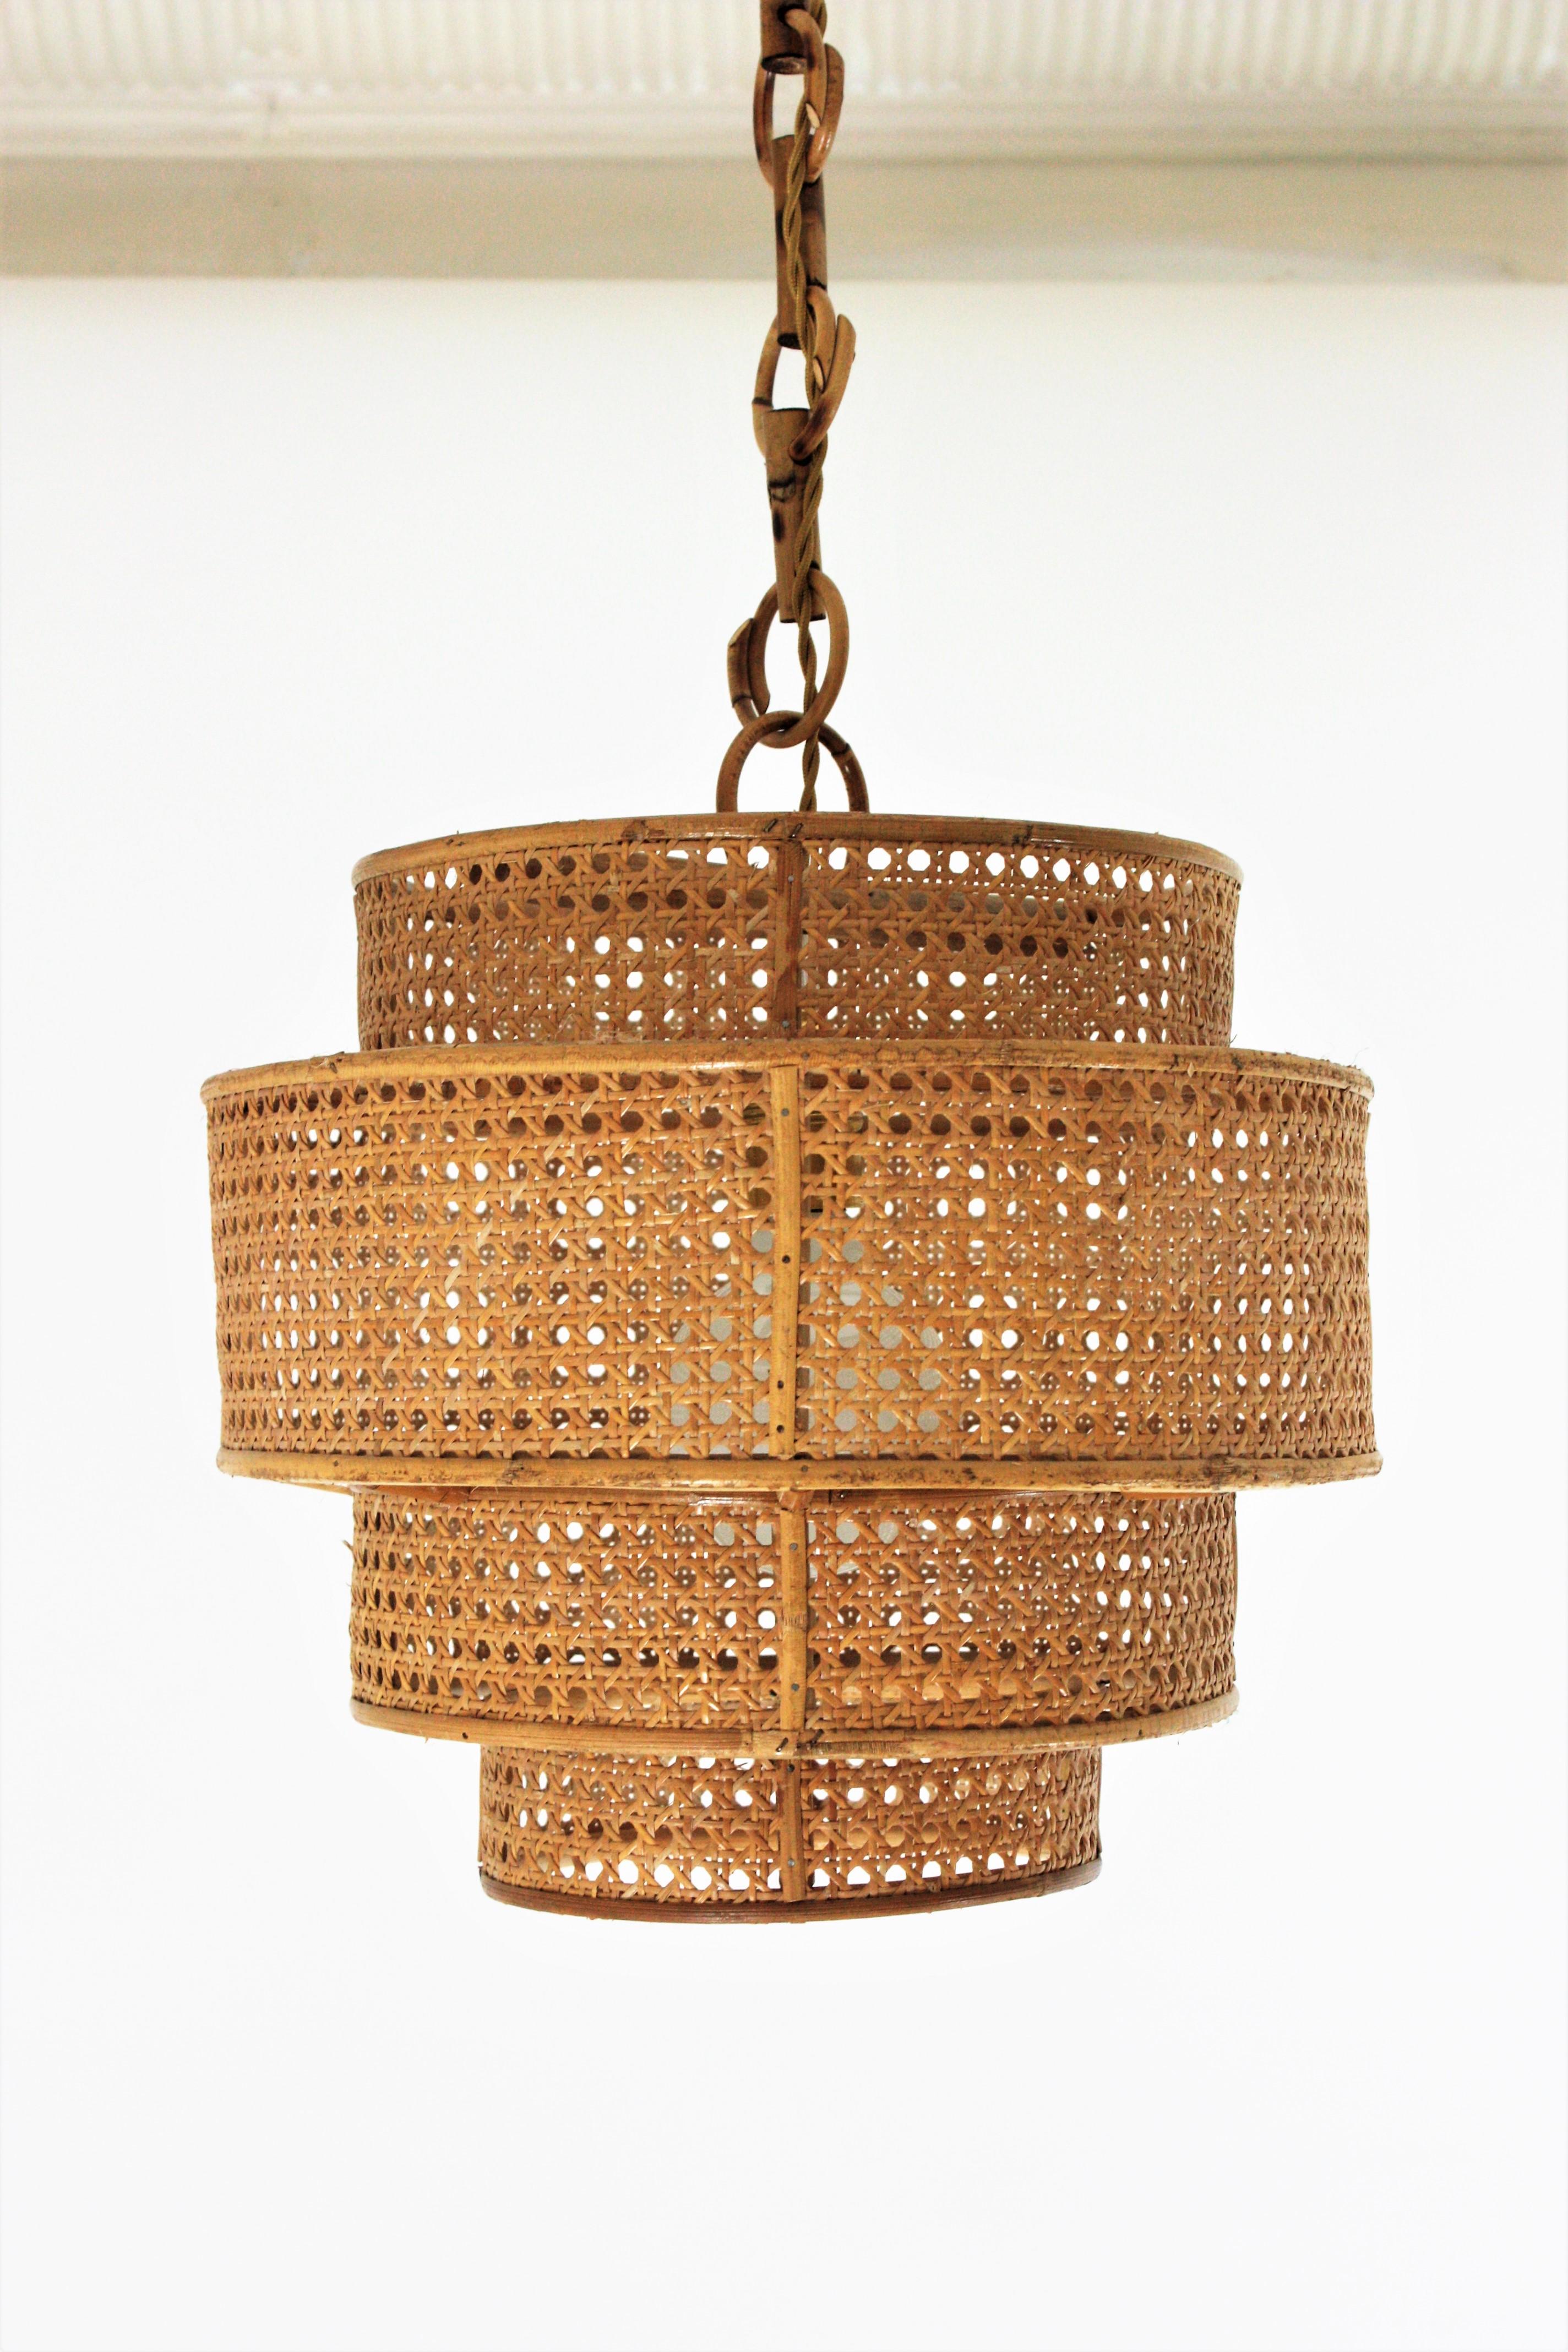 Mid-Century Modern  Rattan Wicker Weave Concentric Cylinder Pendant Hanging Light, 1960s For Sale